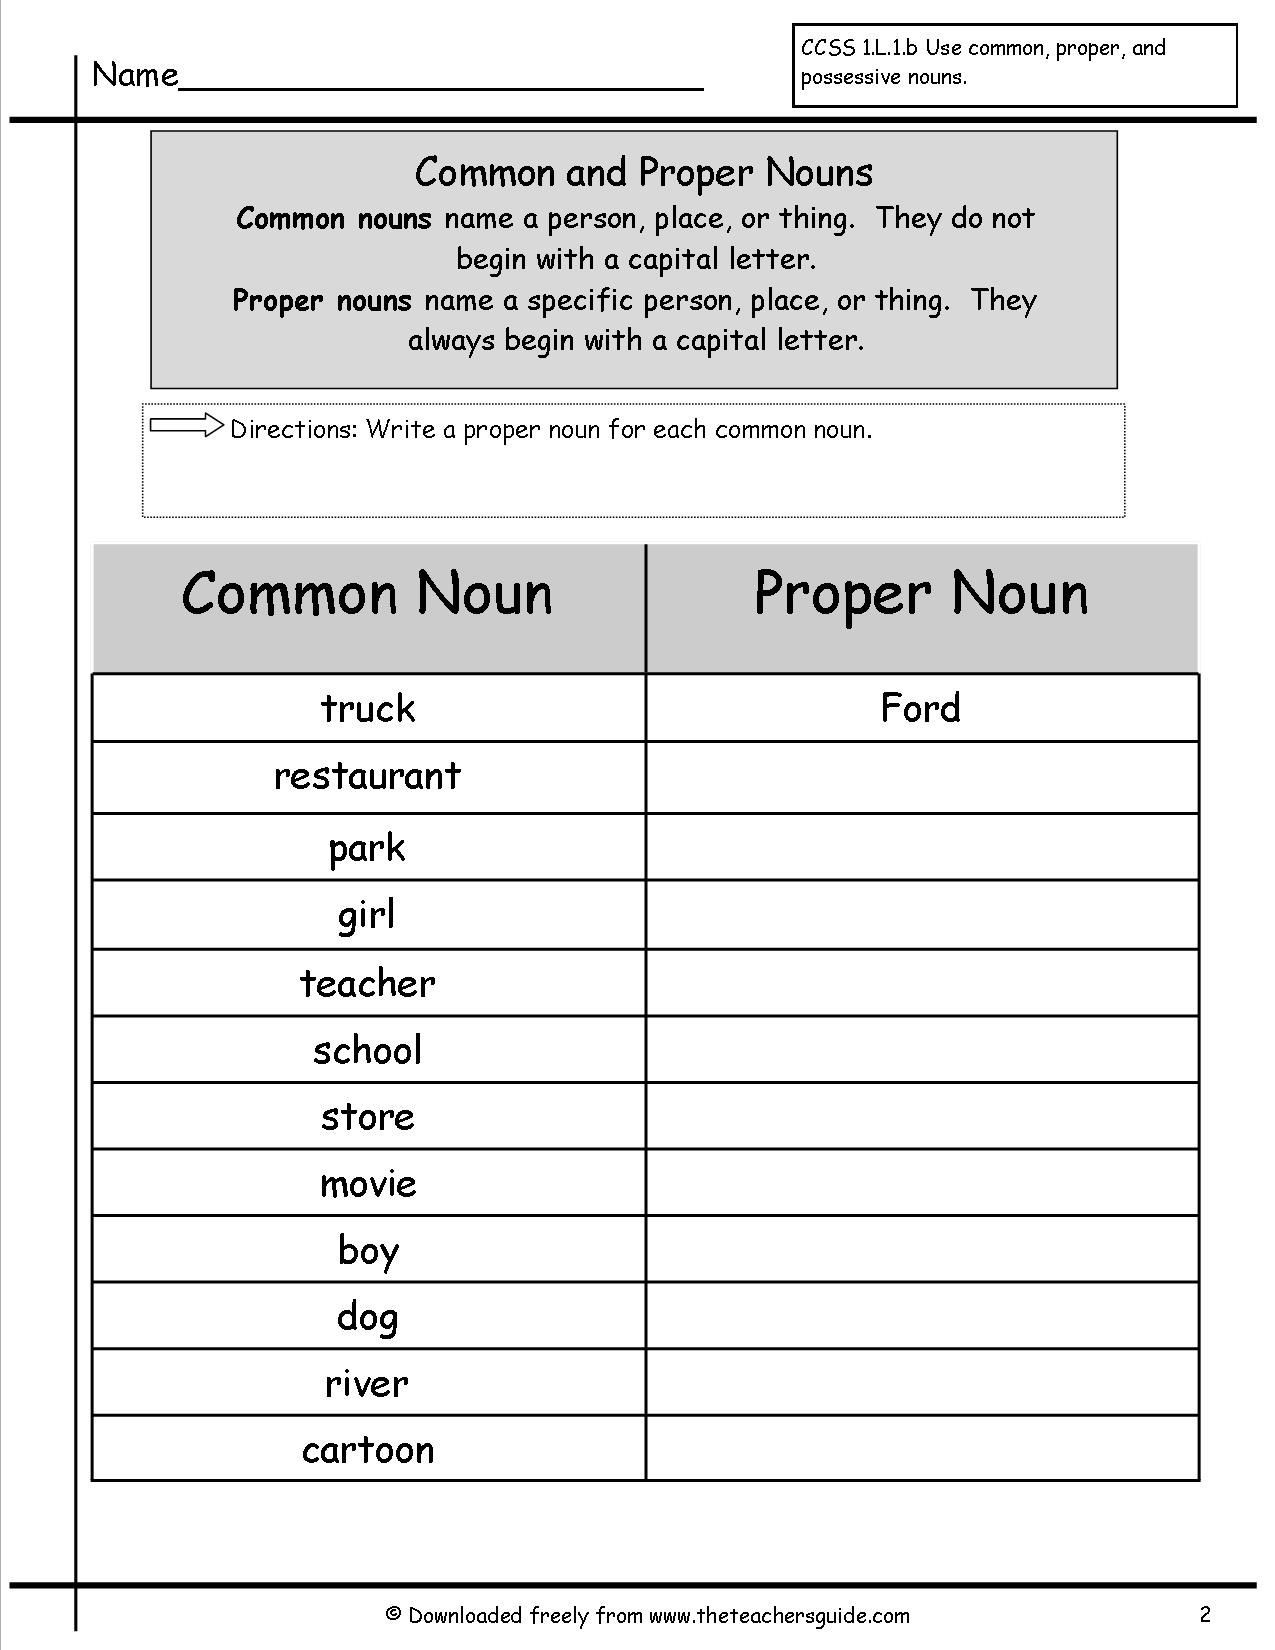 Proper Nouns Worksheet 2nd Grade Mon and Proper Nouns Worksheets Google Search with